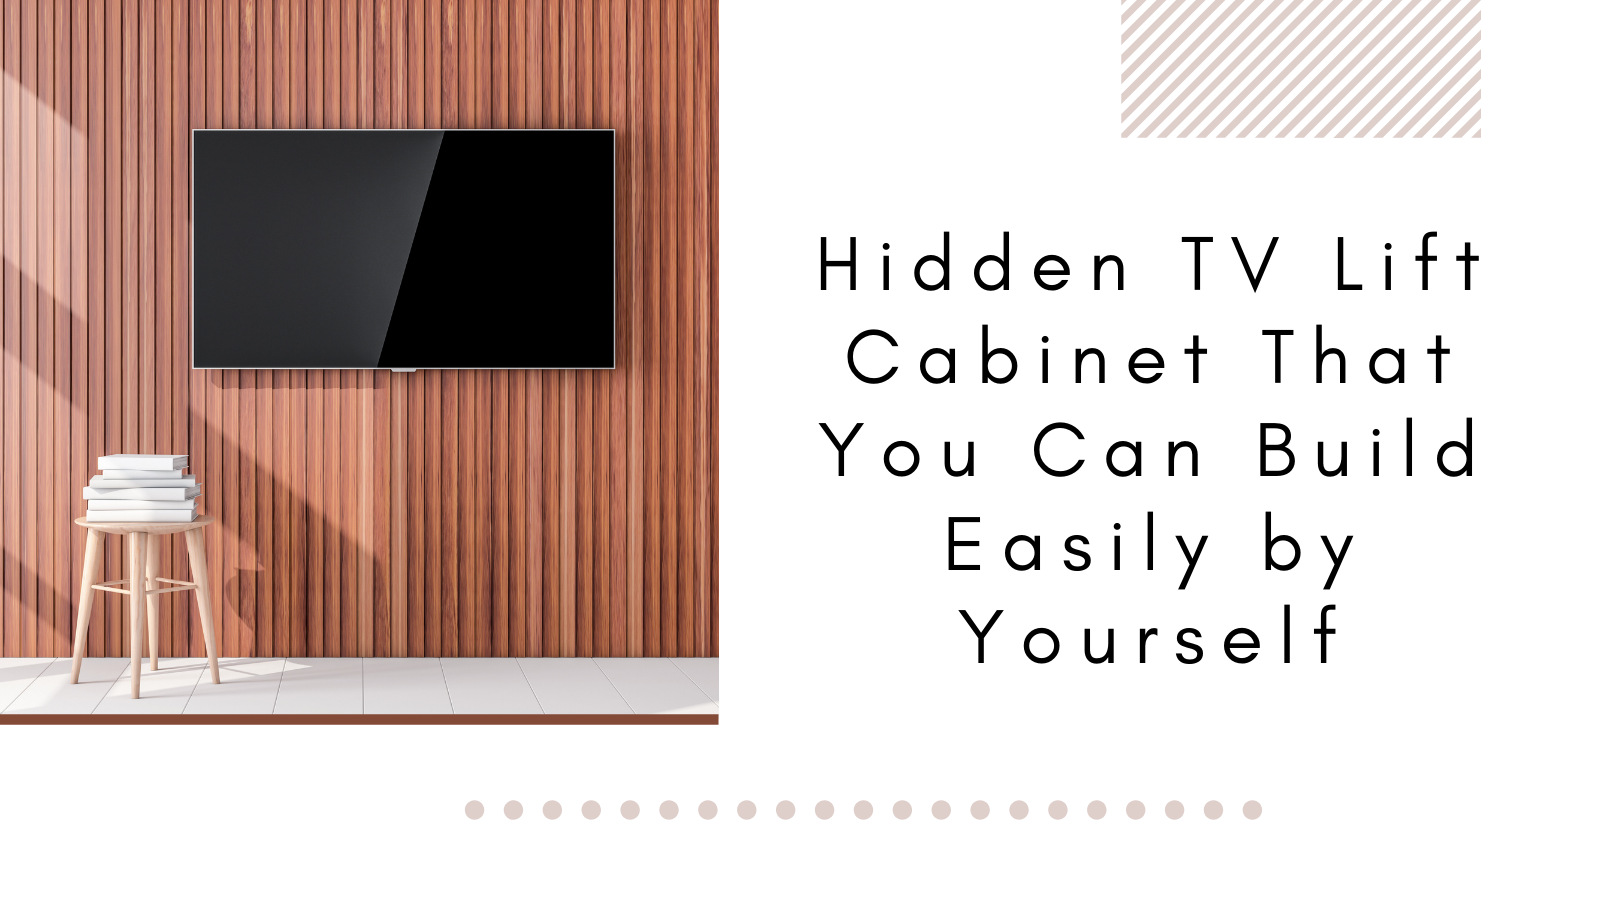 Awesome Hidden TV Lift Cabinet That You Can Build Easily by Yourself, Here Is How